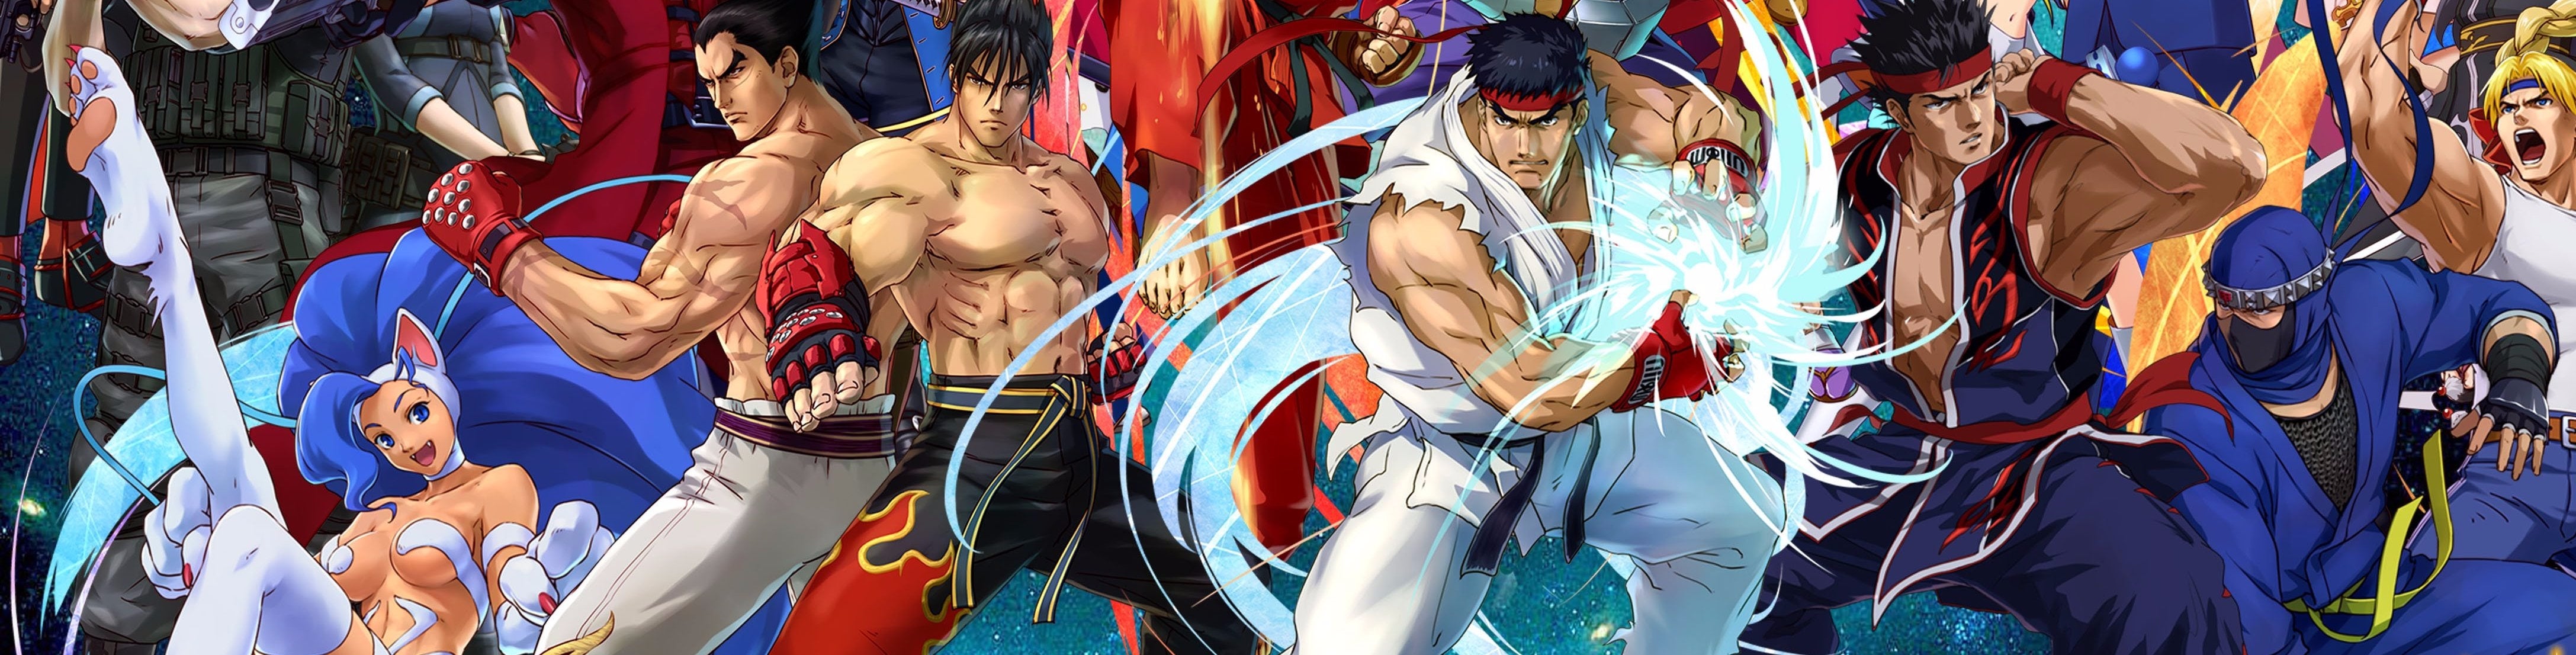 Image for Project X Zone 2 review